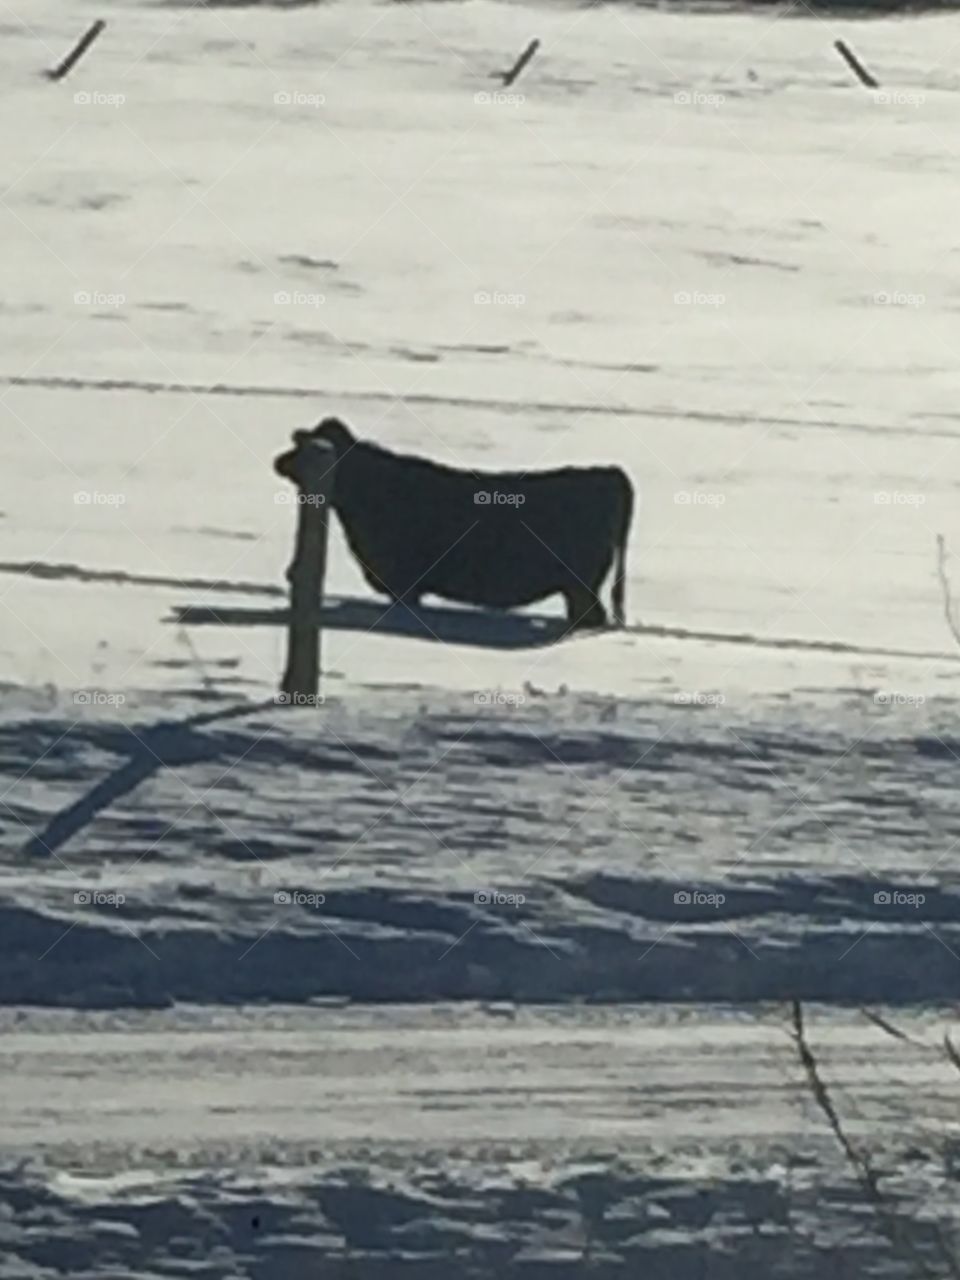 The livestock Jan 27 after a big snow fall are up to there Bellies in the snow making it hard to get around.